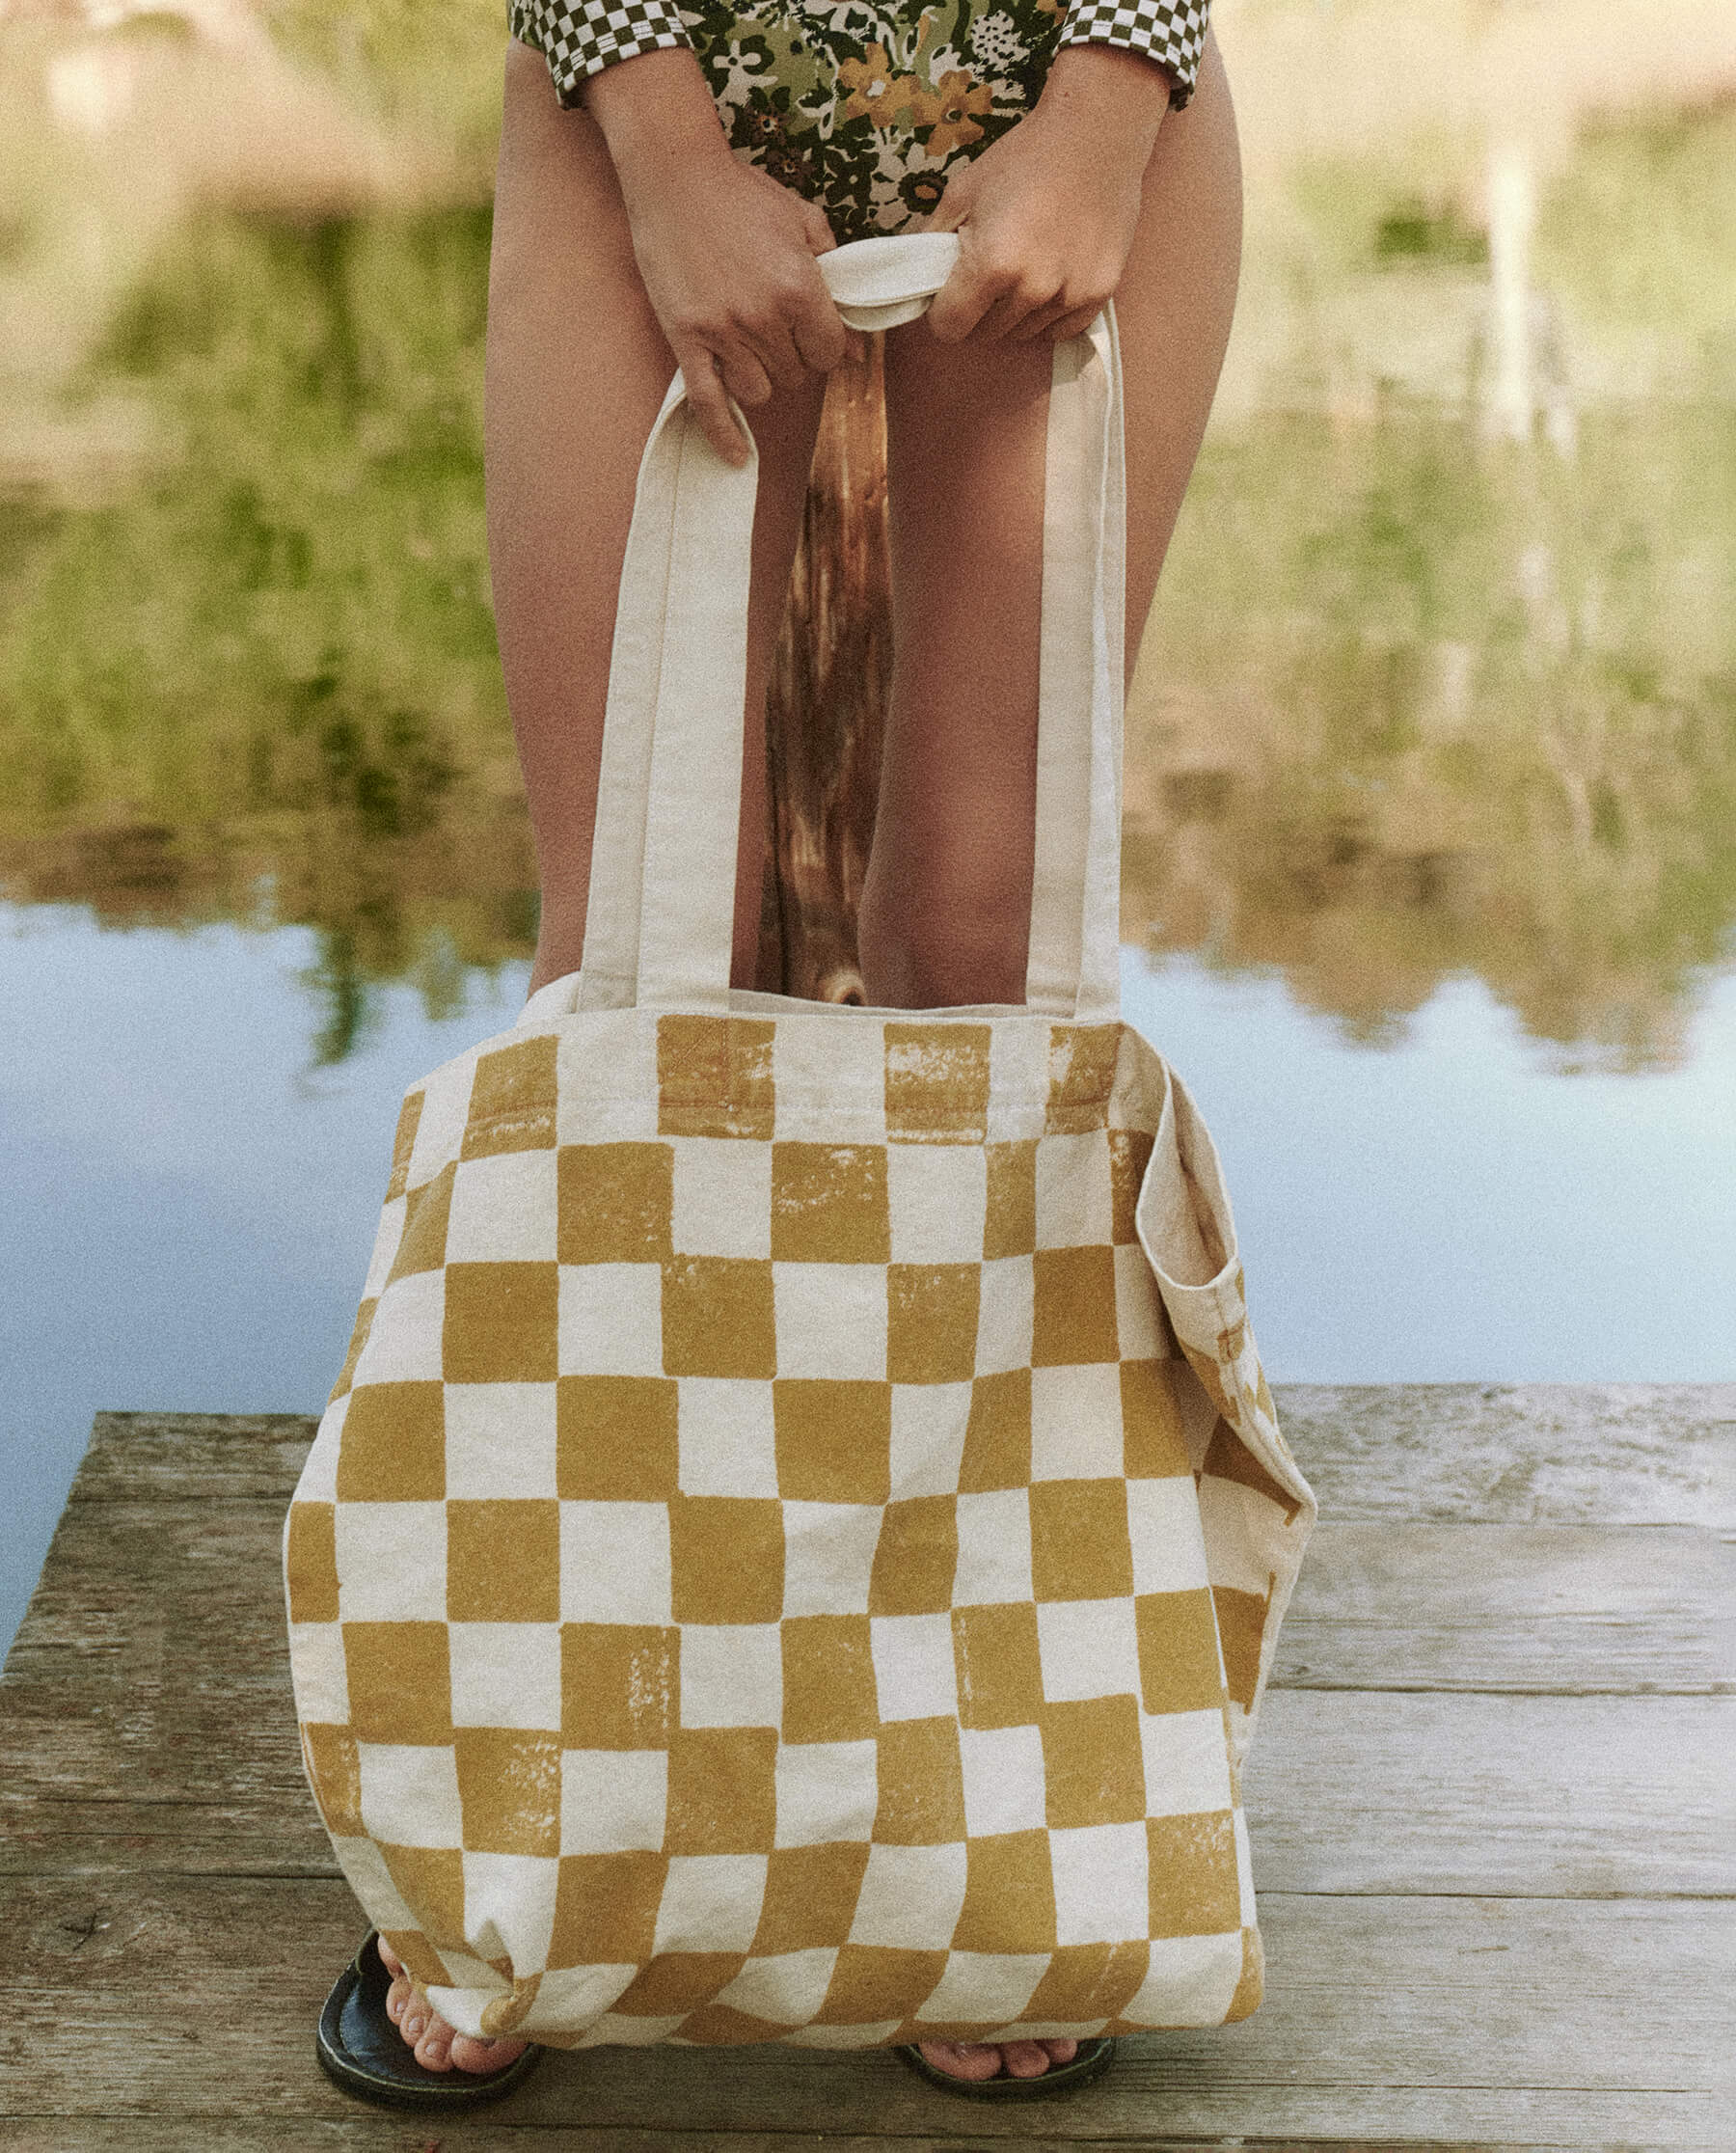 The Beach Tote. -- Cream with Citron Check Stamp TOTES THE GREAT. SP23 SWIM